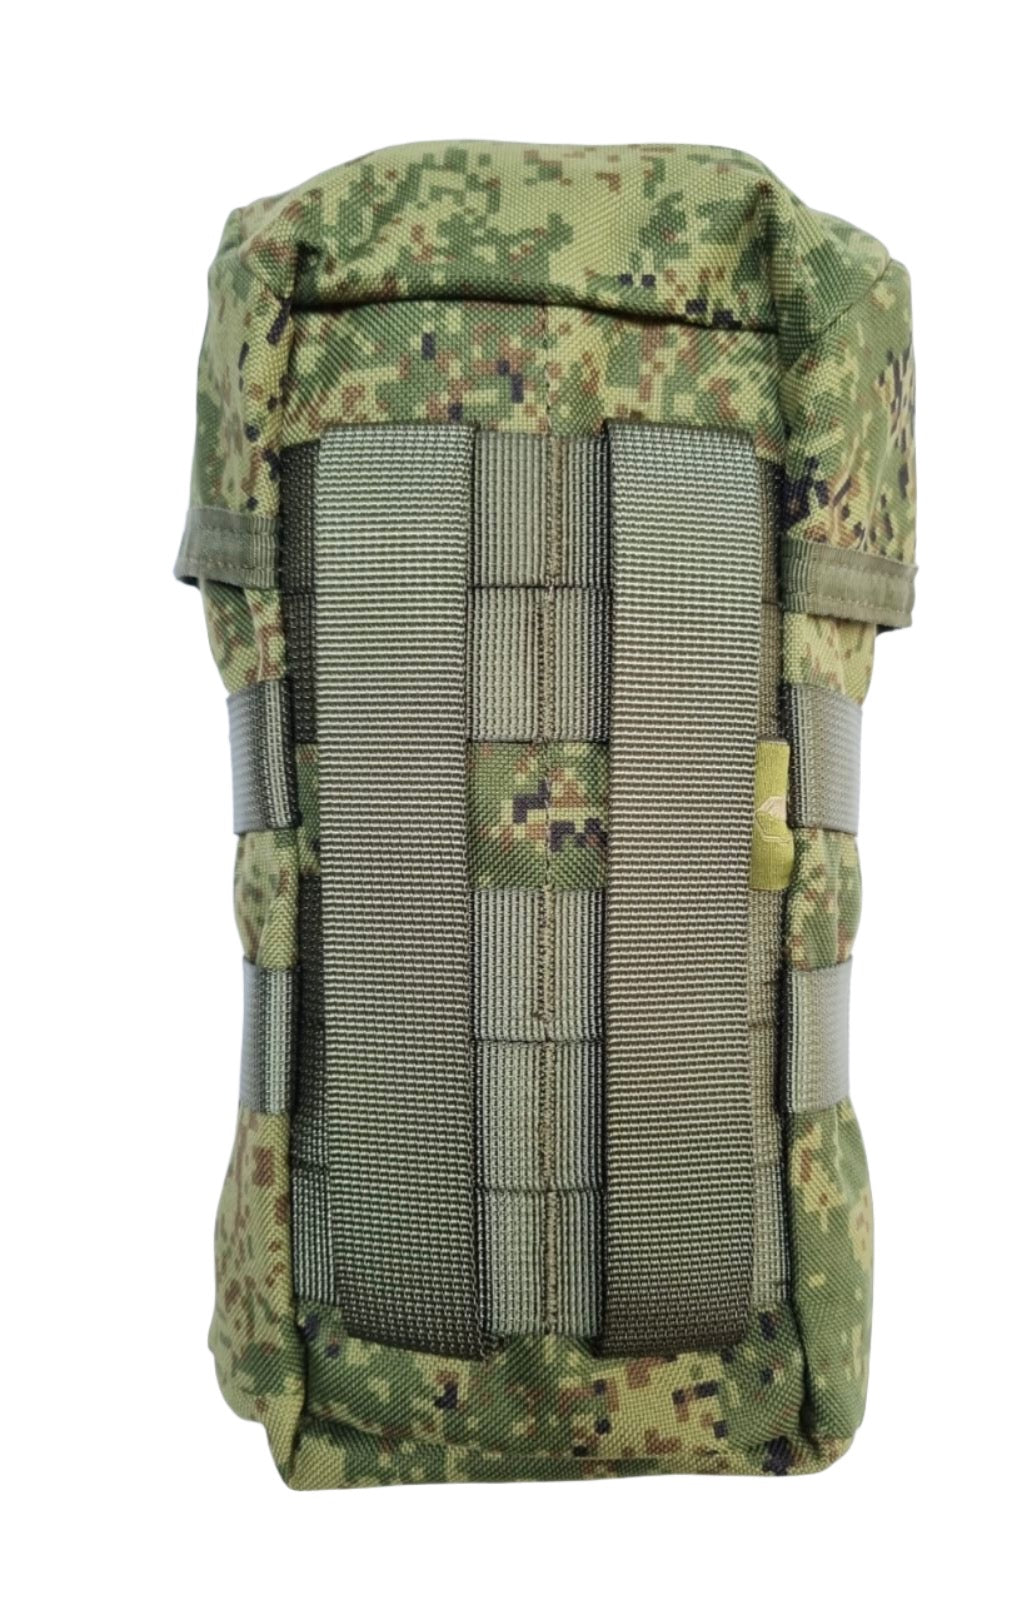 Shadow Strategic Camouflage Canteen Pouch Color Russian digi.